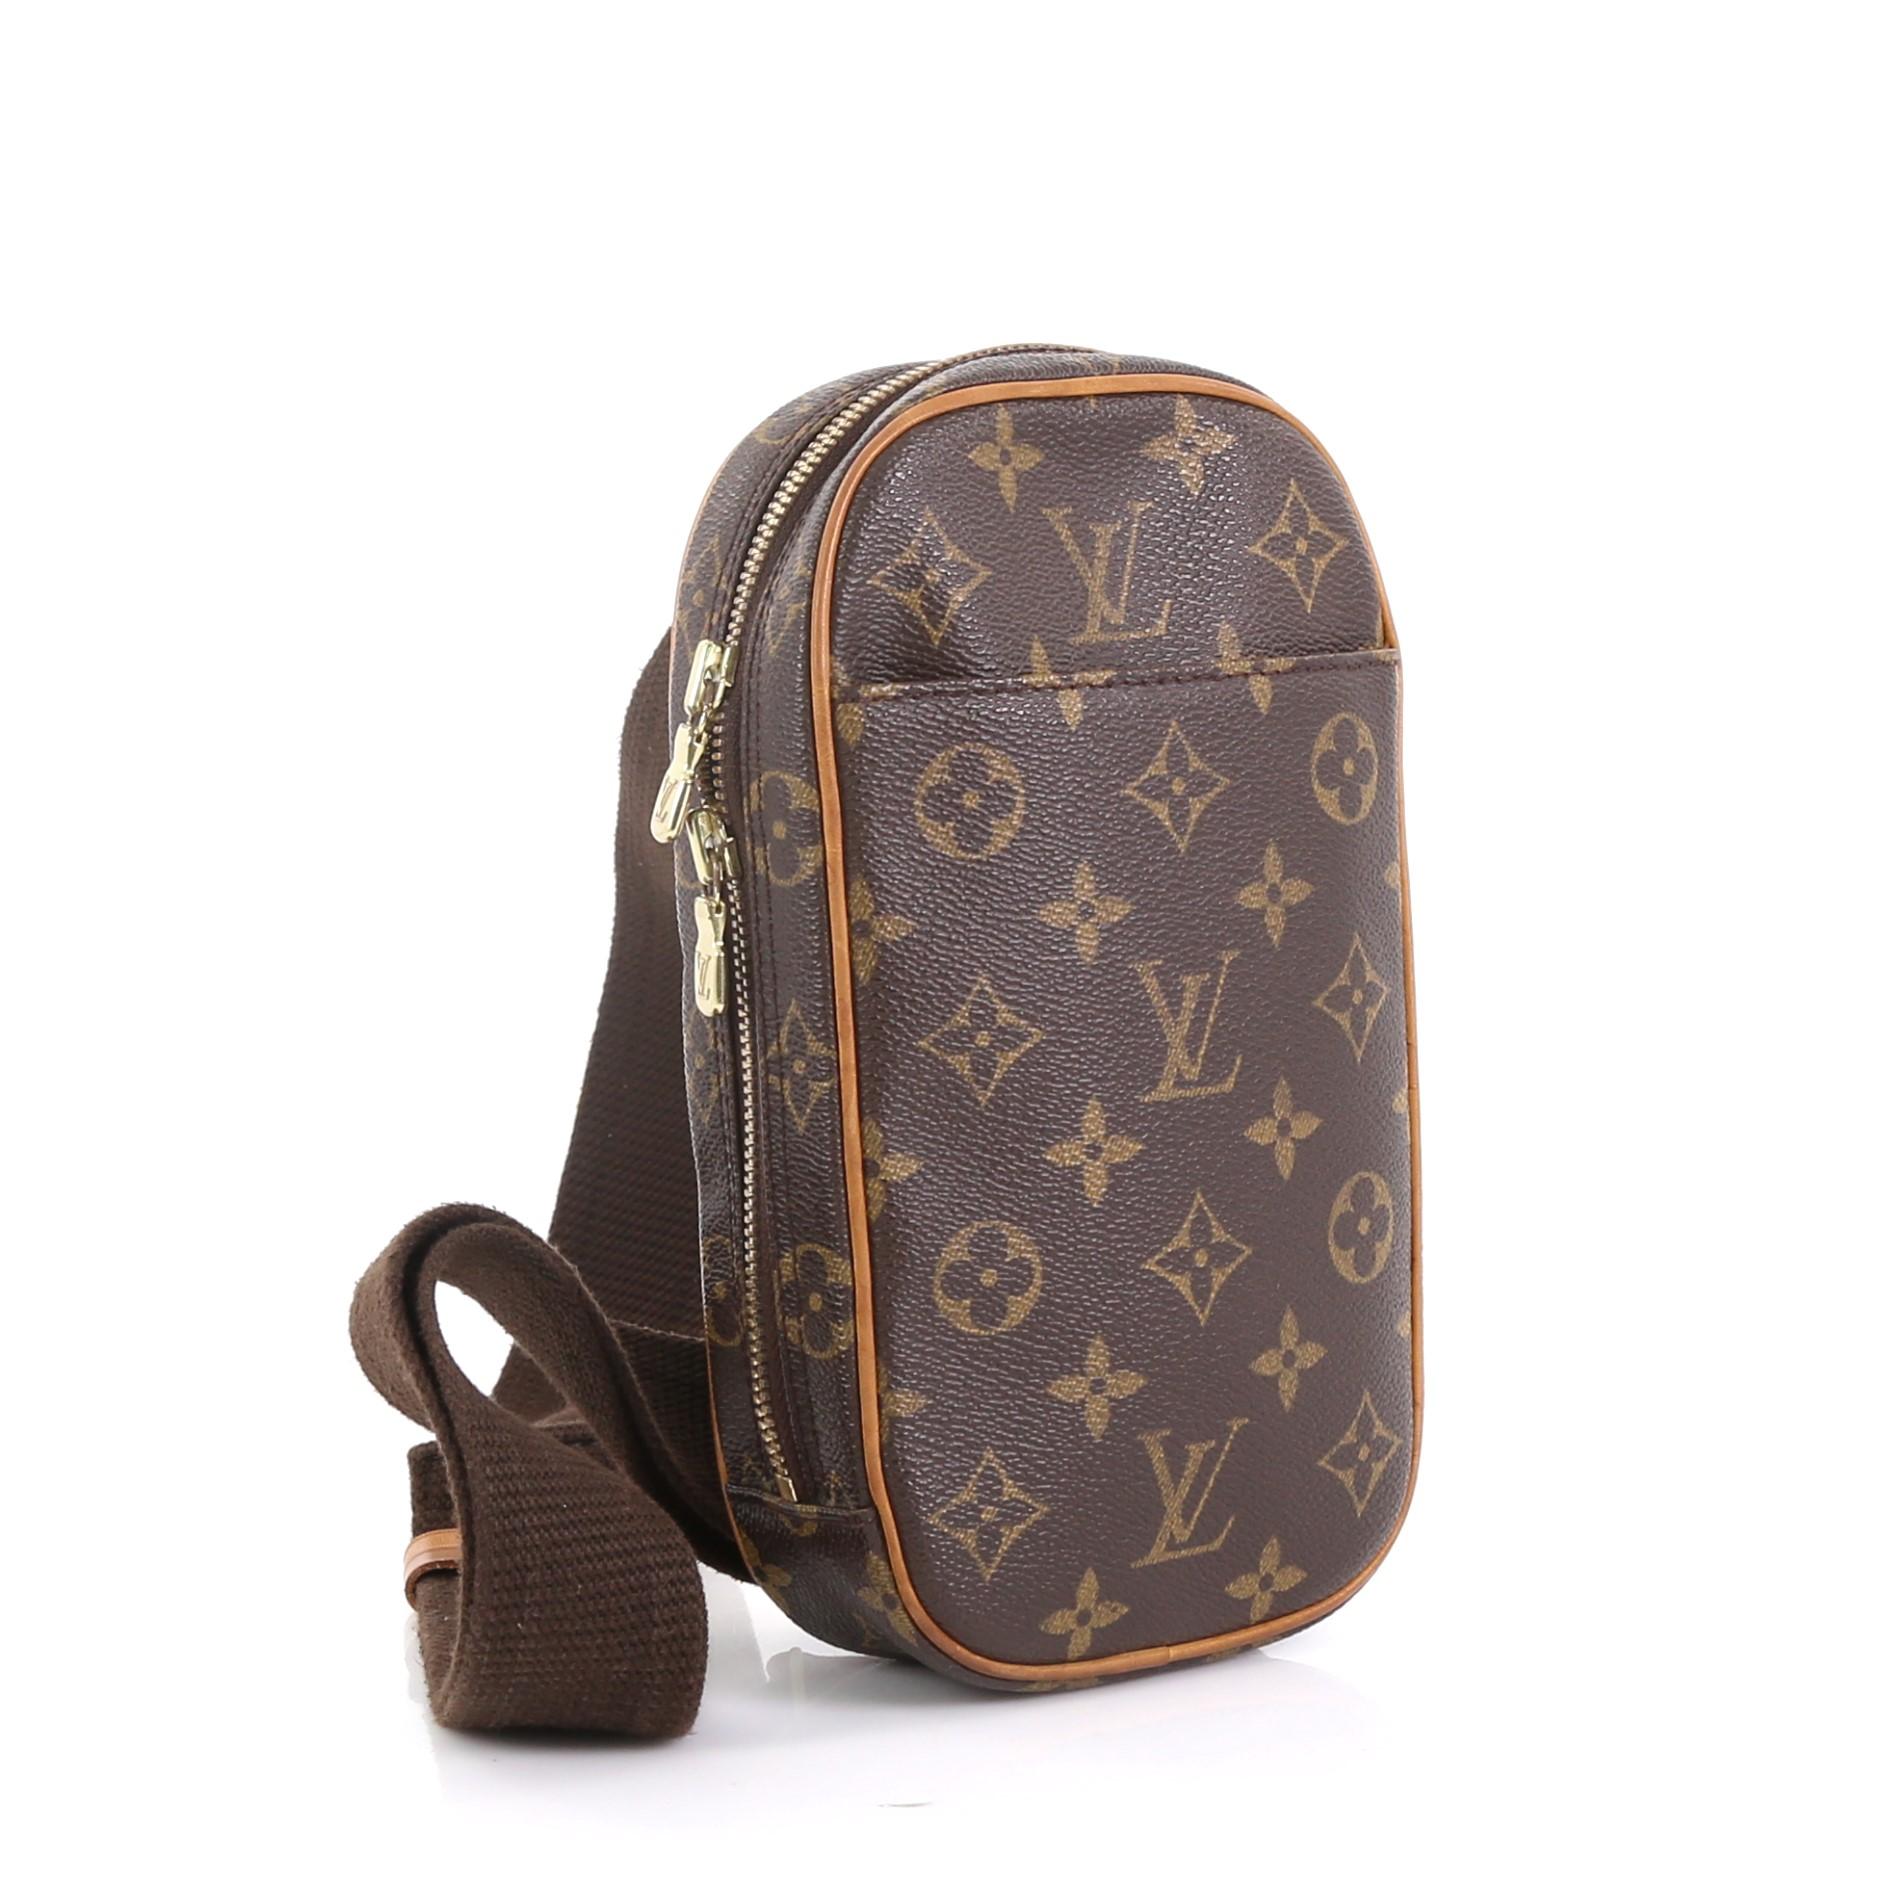 This Louis Vuitton Pochette Gange Monogram Canvas, crafted from brown monogram coated canvas, features an adjustable textile strap, exterior front pocket and gold-tone hardware. Its all-around zip closure opens to a brown fabric interior.